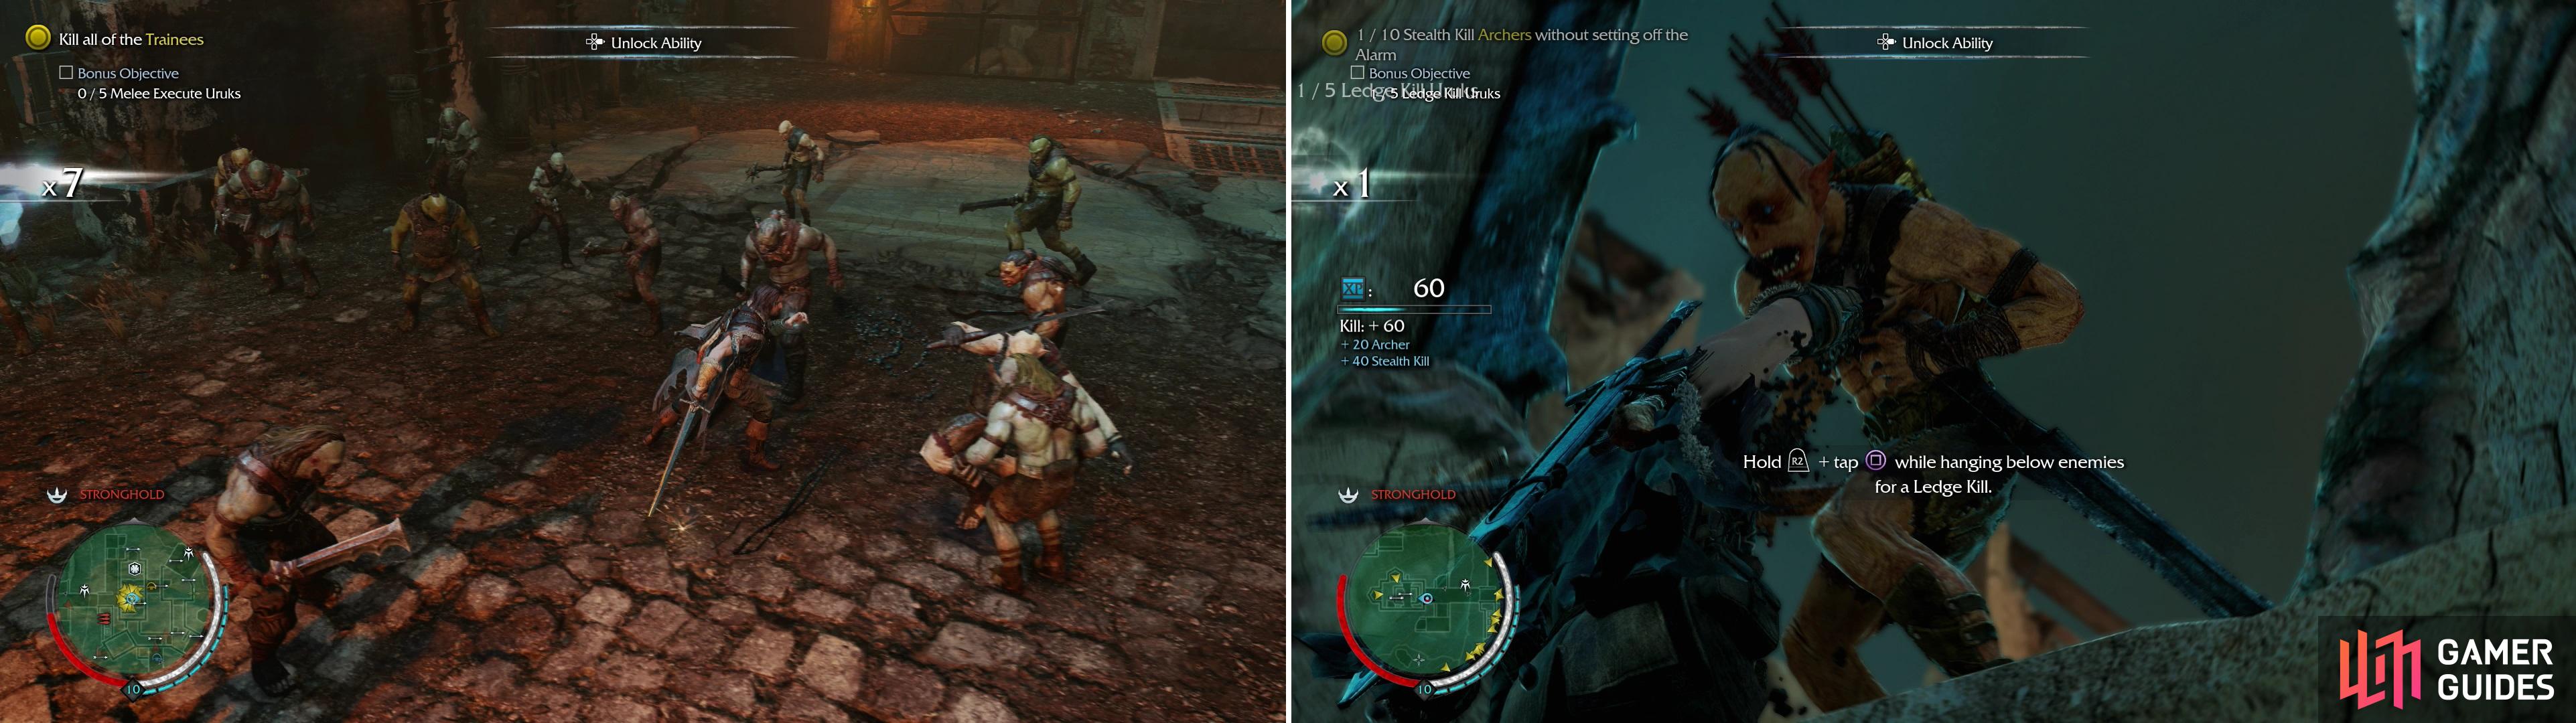 The Sword Mission “Cutting the Lines” tasks you with performing melee Executions while fighting off a horde of Uruks (left), skills that you must learn sooner or later. “Clear the Skies” tests your ability to sneakily Ledge Kill archers (right).